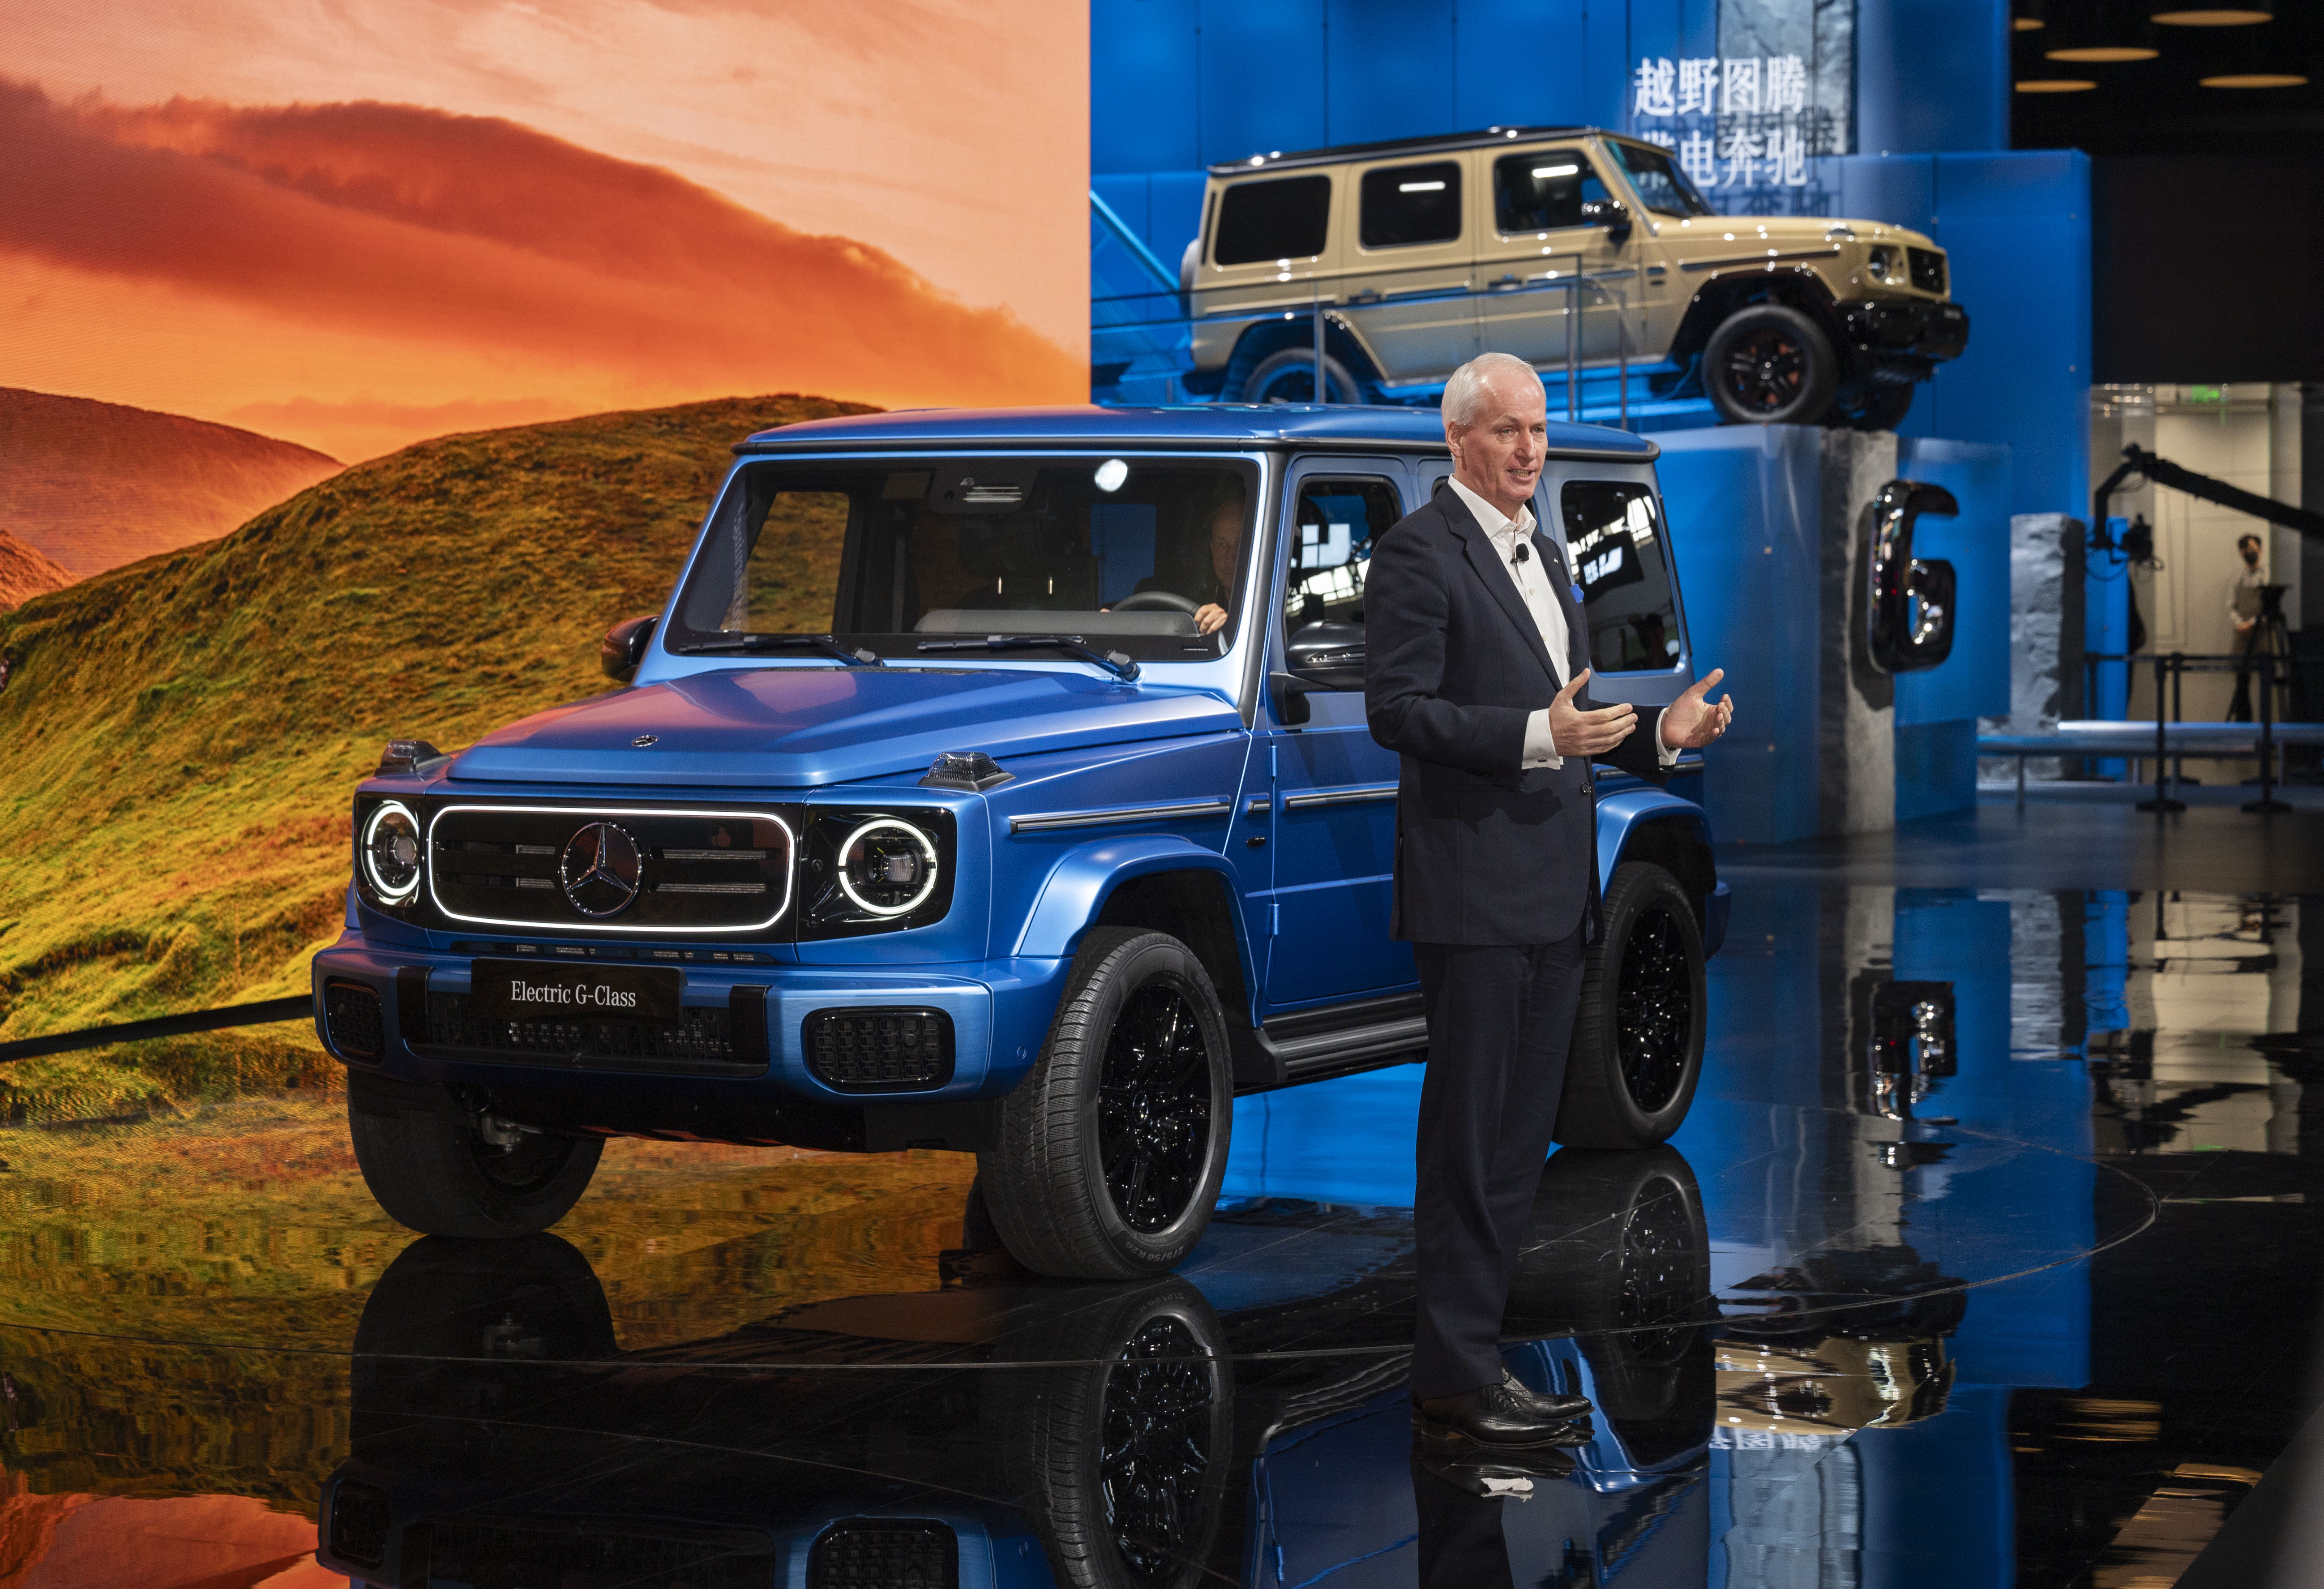 Hubertus Troska, member of the Board of Management of Mercedes-Benz Group AG, unveils the Mercedes-Benz G-Class electric offroad vehicle at the 2024 Beijing International Automotive Exhibition in Shunyi District, Beijing, capital of China, April 25, 2024. (Xinhua/Cai Yang)